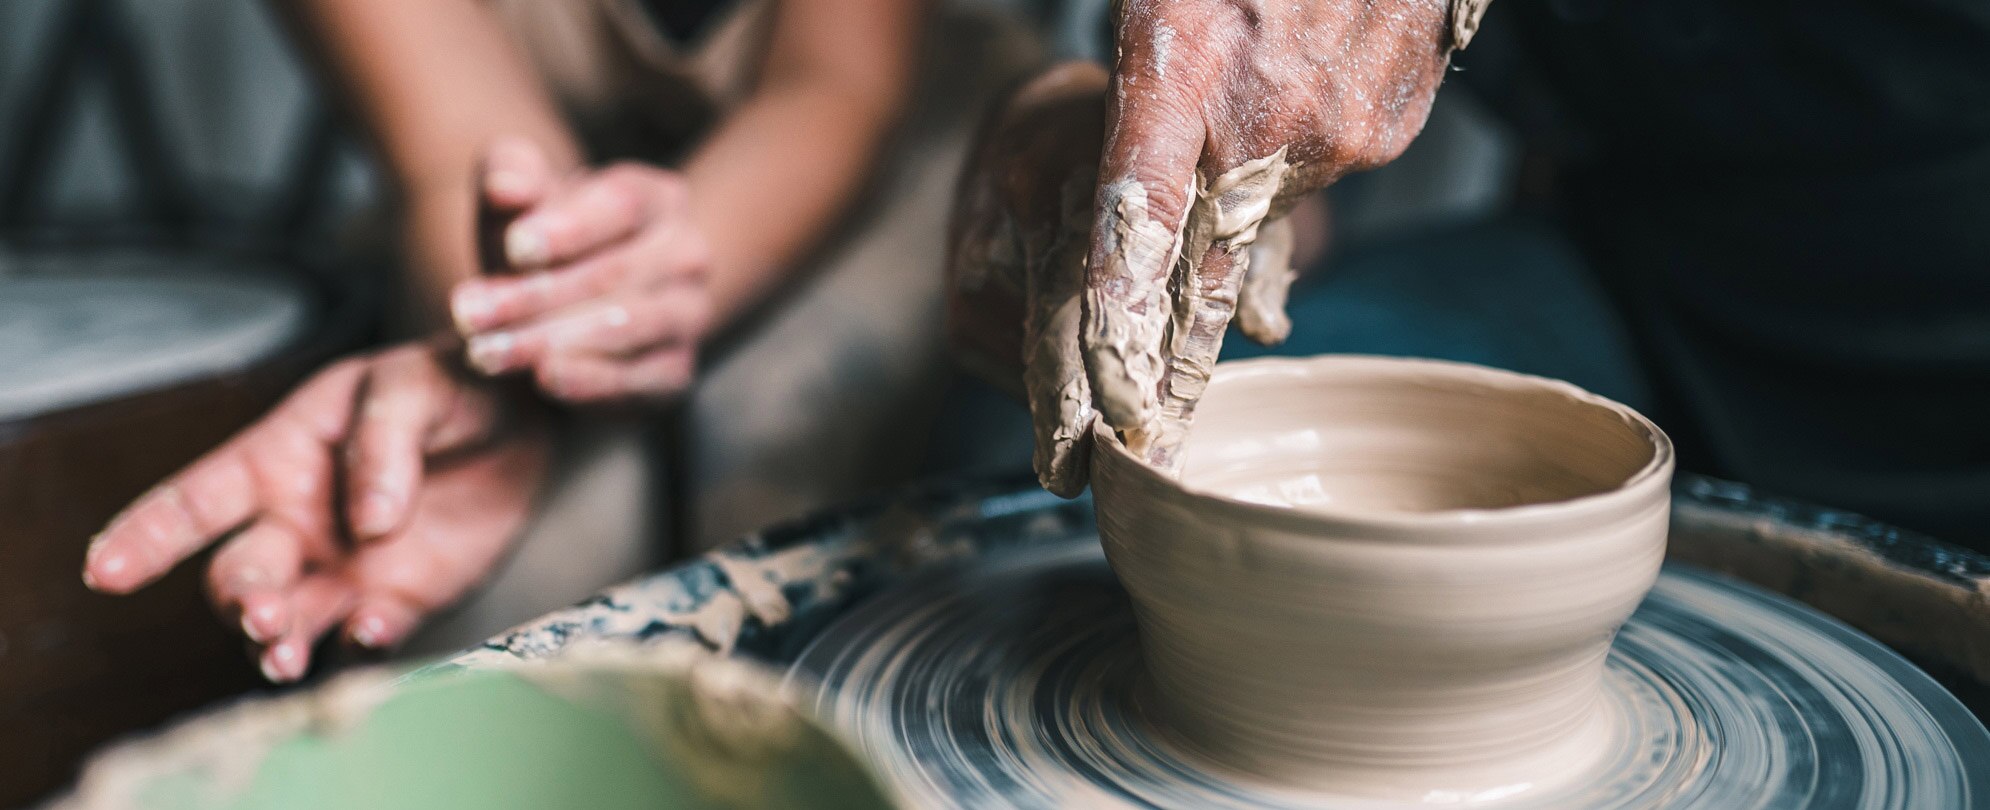 Hands forming a clay bowl on a pottery wheel